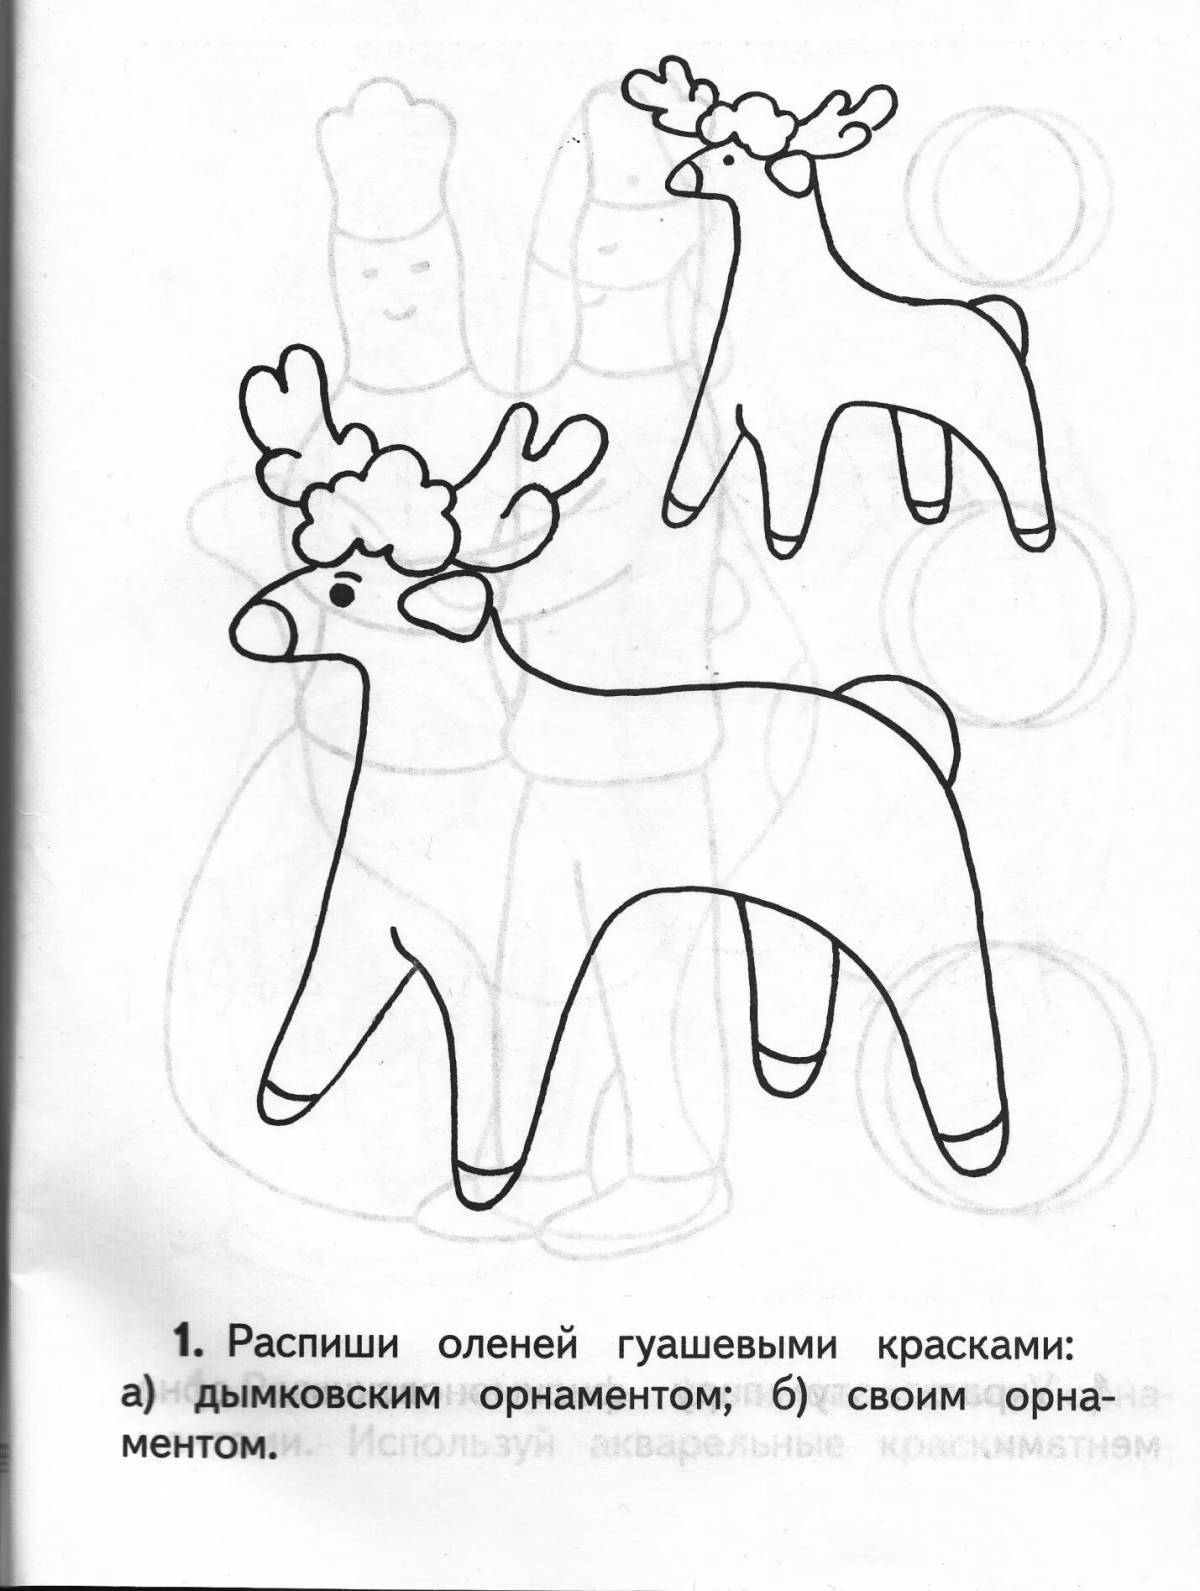 Coloring page cute Dymkovo horse for kids